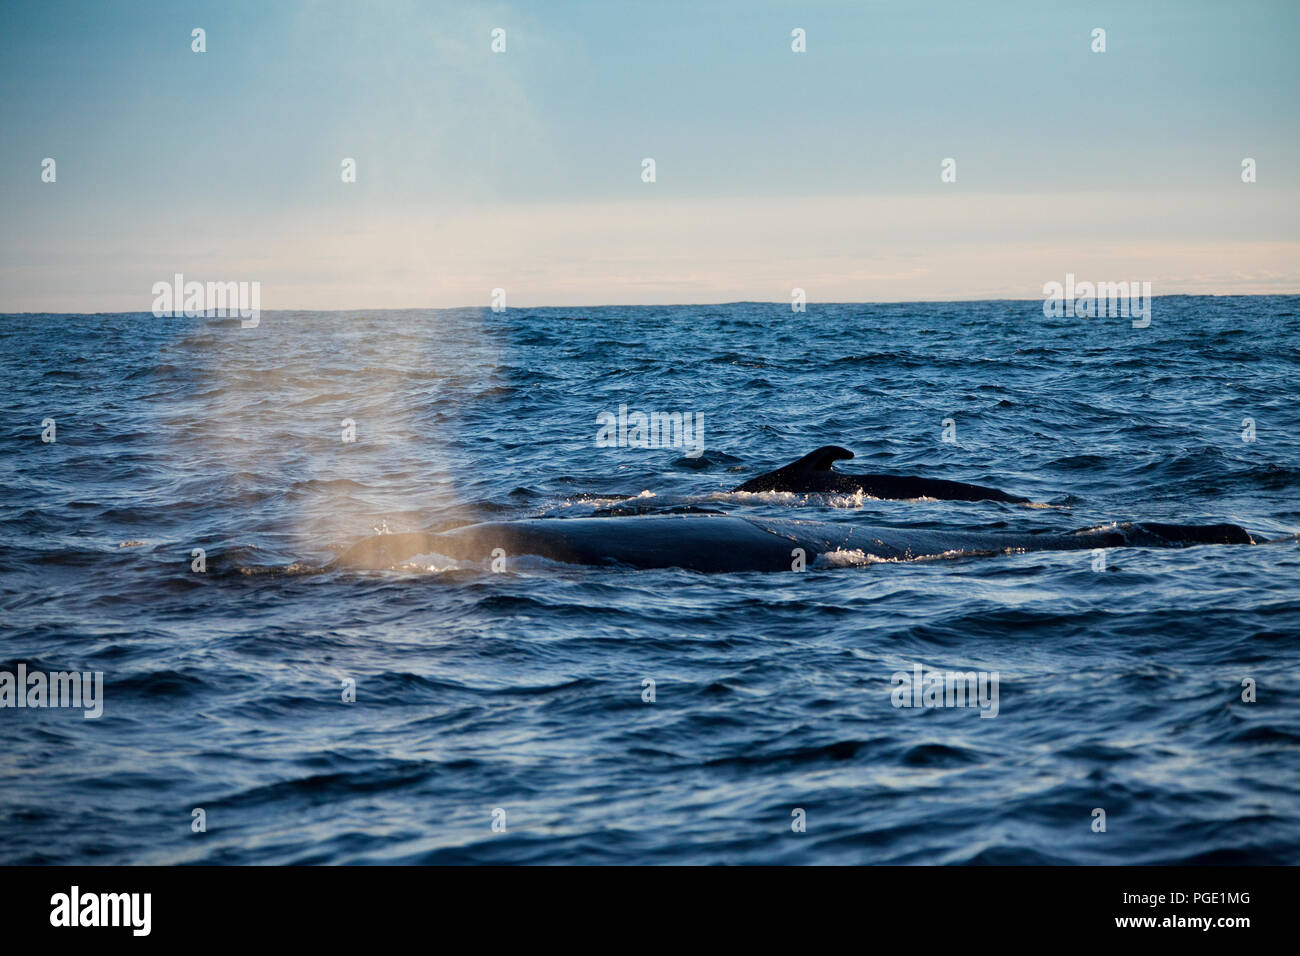 Migrating Southern Wright whales, heading for their breeding ground, Gansbaai, South Africa. Stock Photo